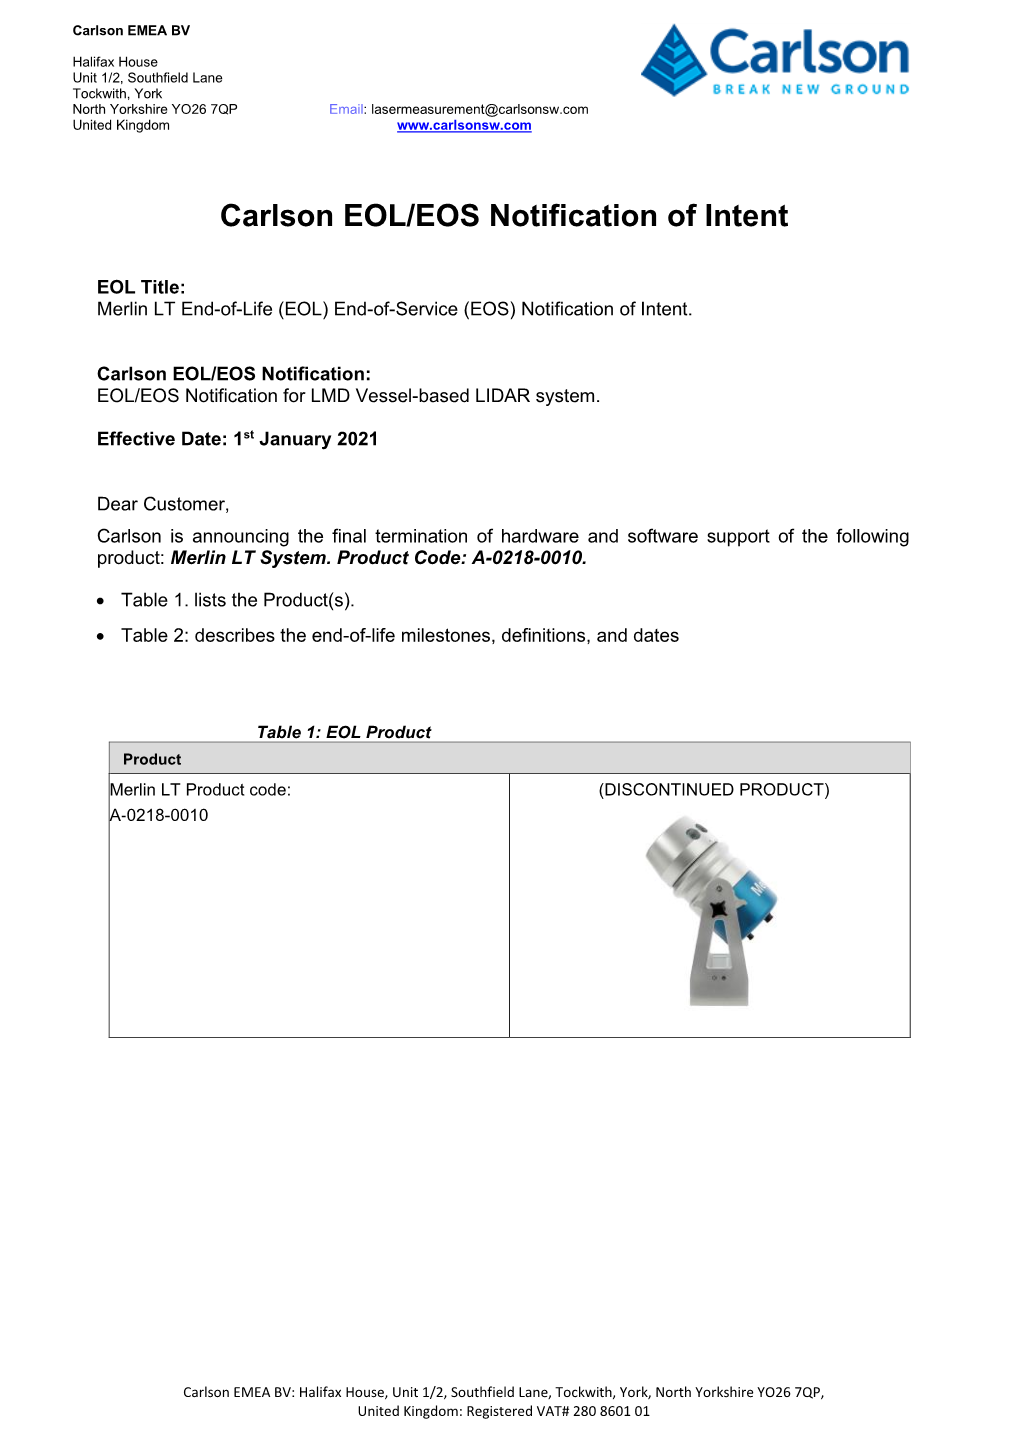 EOL Notification Program, This Notice Serves As Formal Communication of Carlson’S Intent to Perform a Final Manufacture Discontinue (MD) of the Products Listed Above